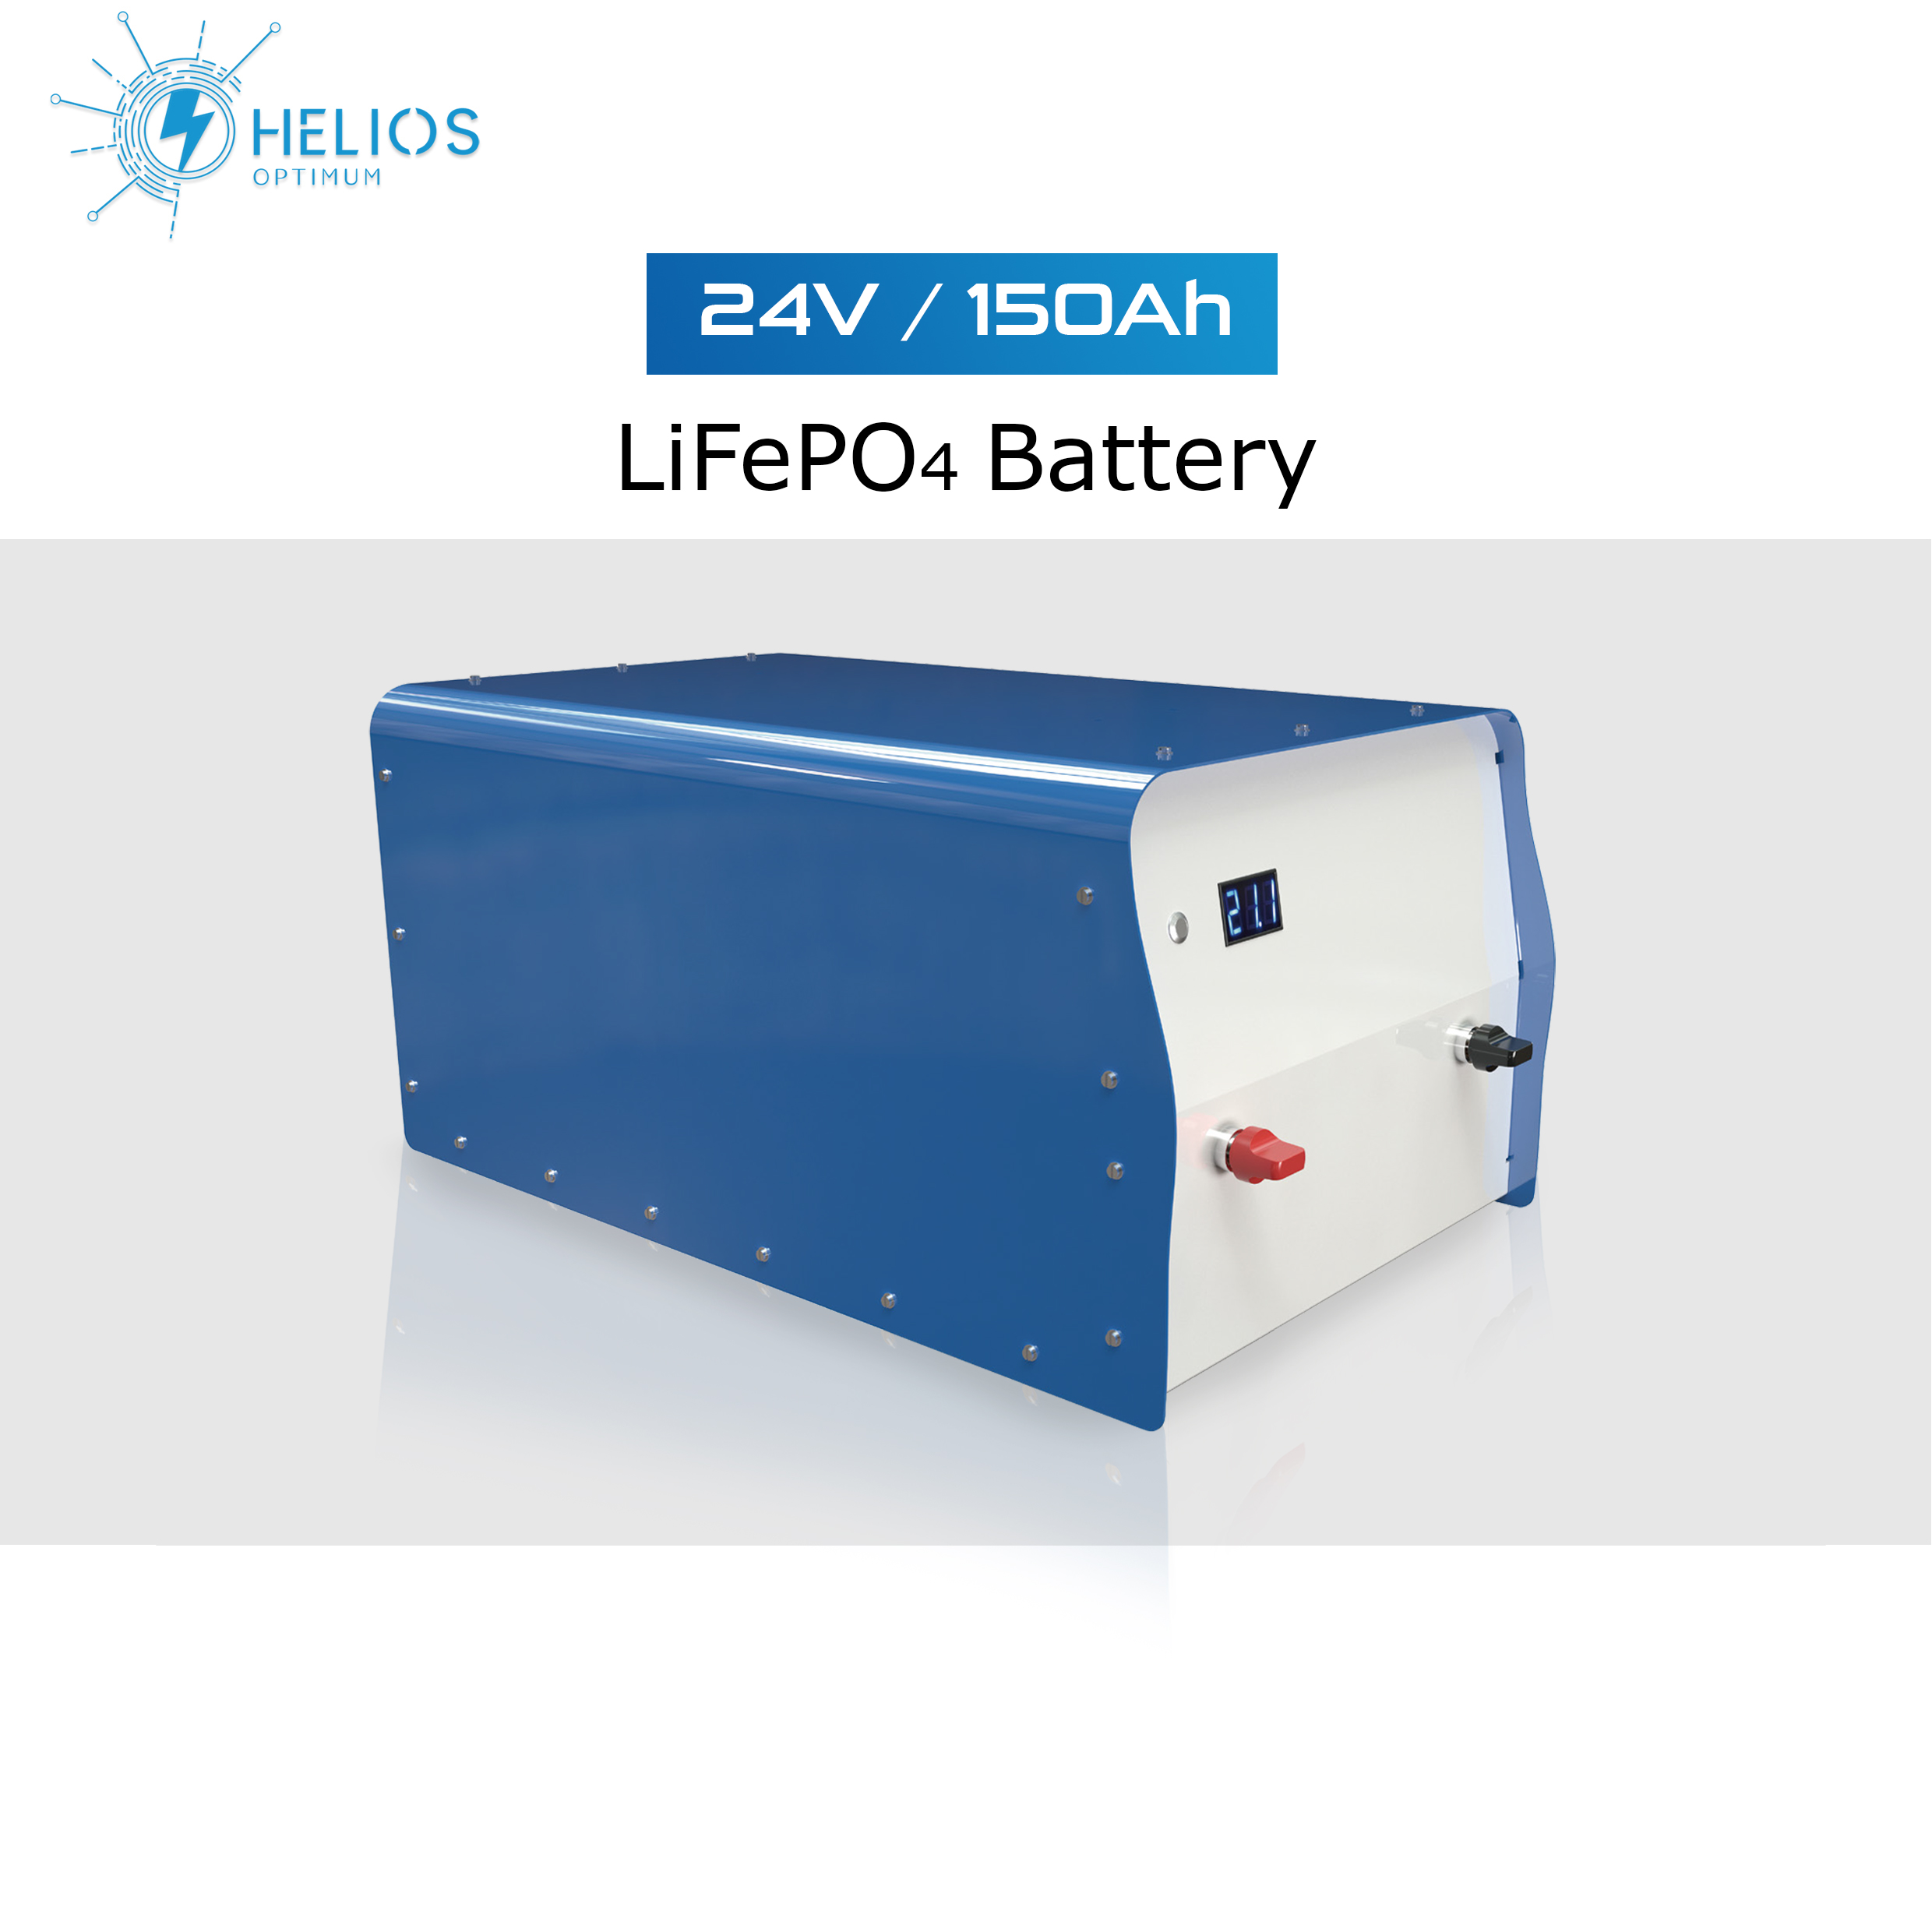 Blue Carbon 24V 150Ah LiFePO4 Battery with Built-in BMS and